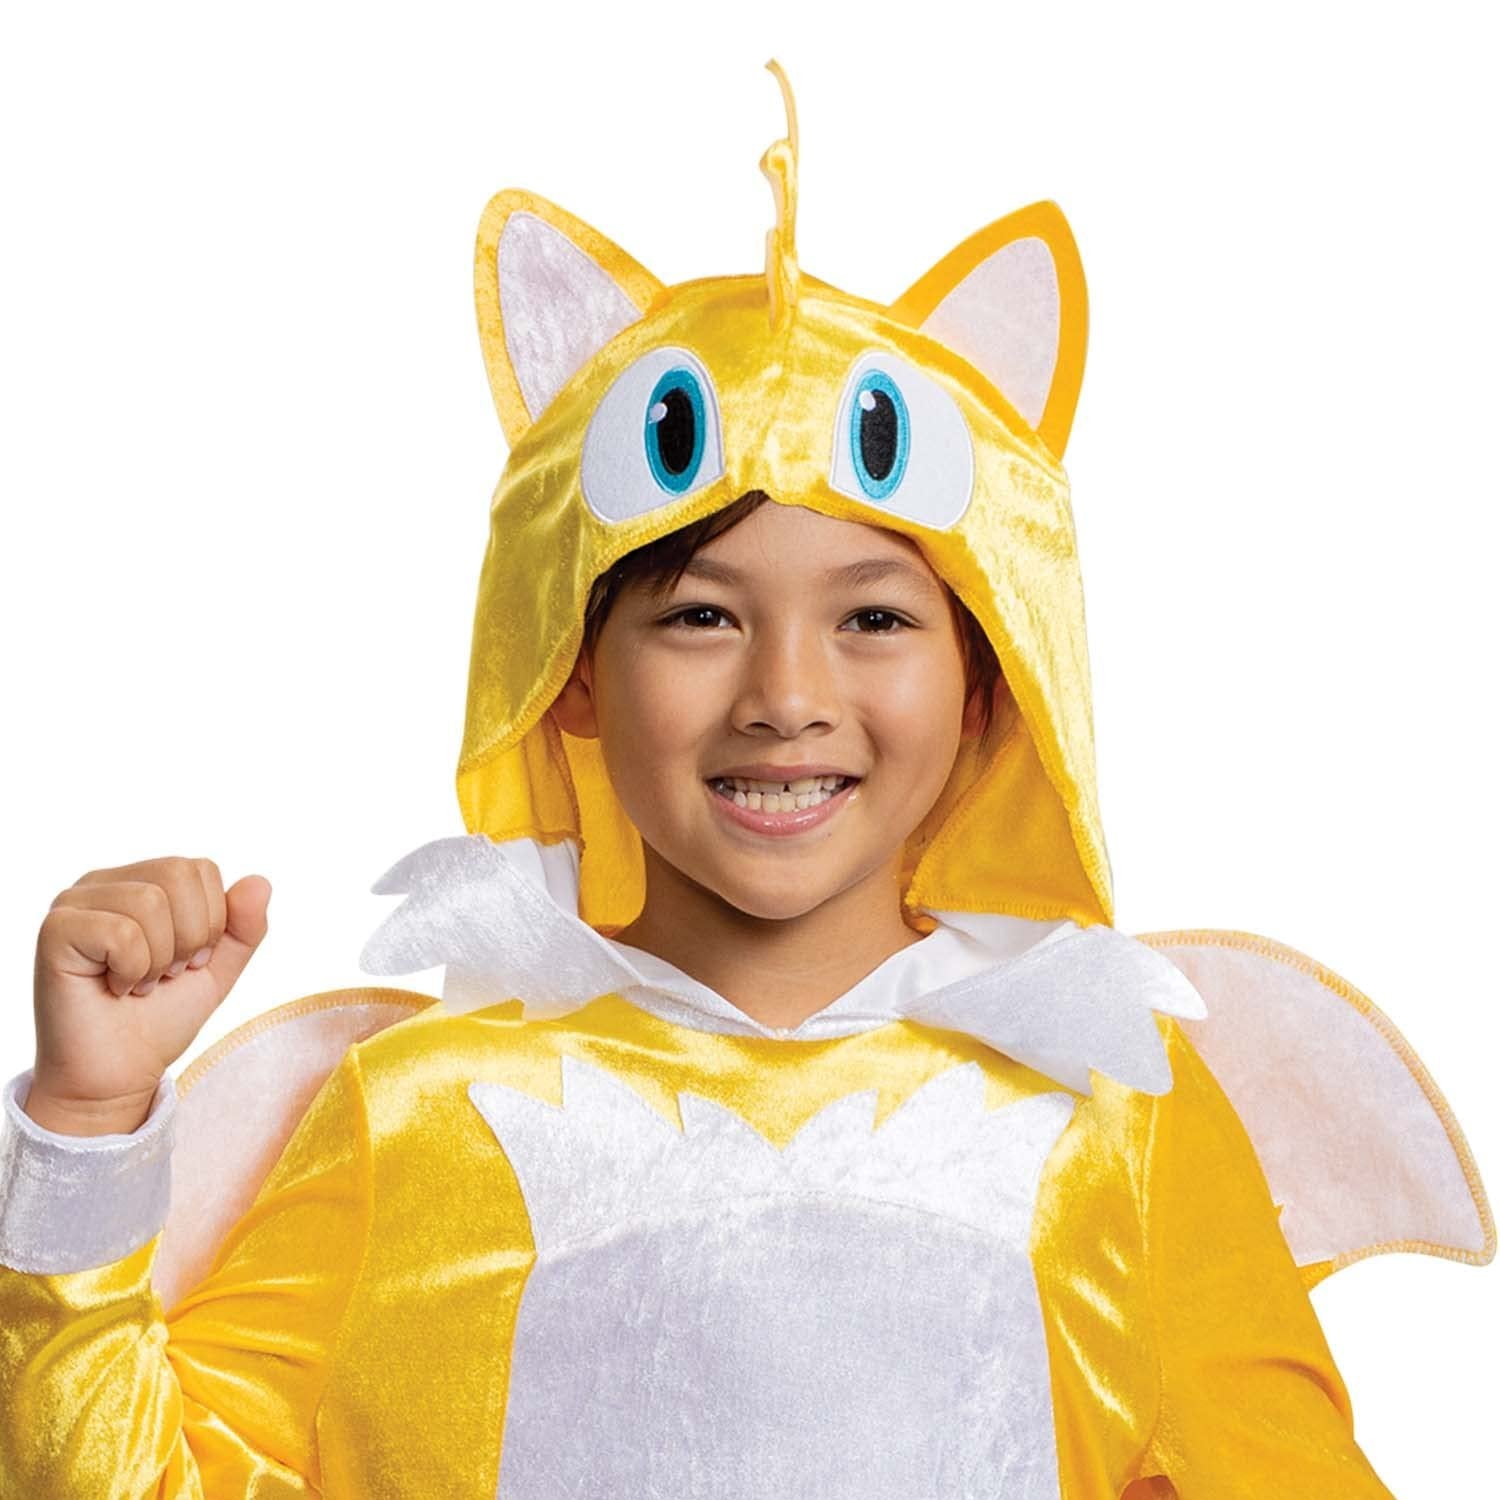 Sonic Tails Costume, Official Sonic Movie Costume and Headpiece, Kids Size Large (10-12)